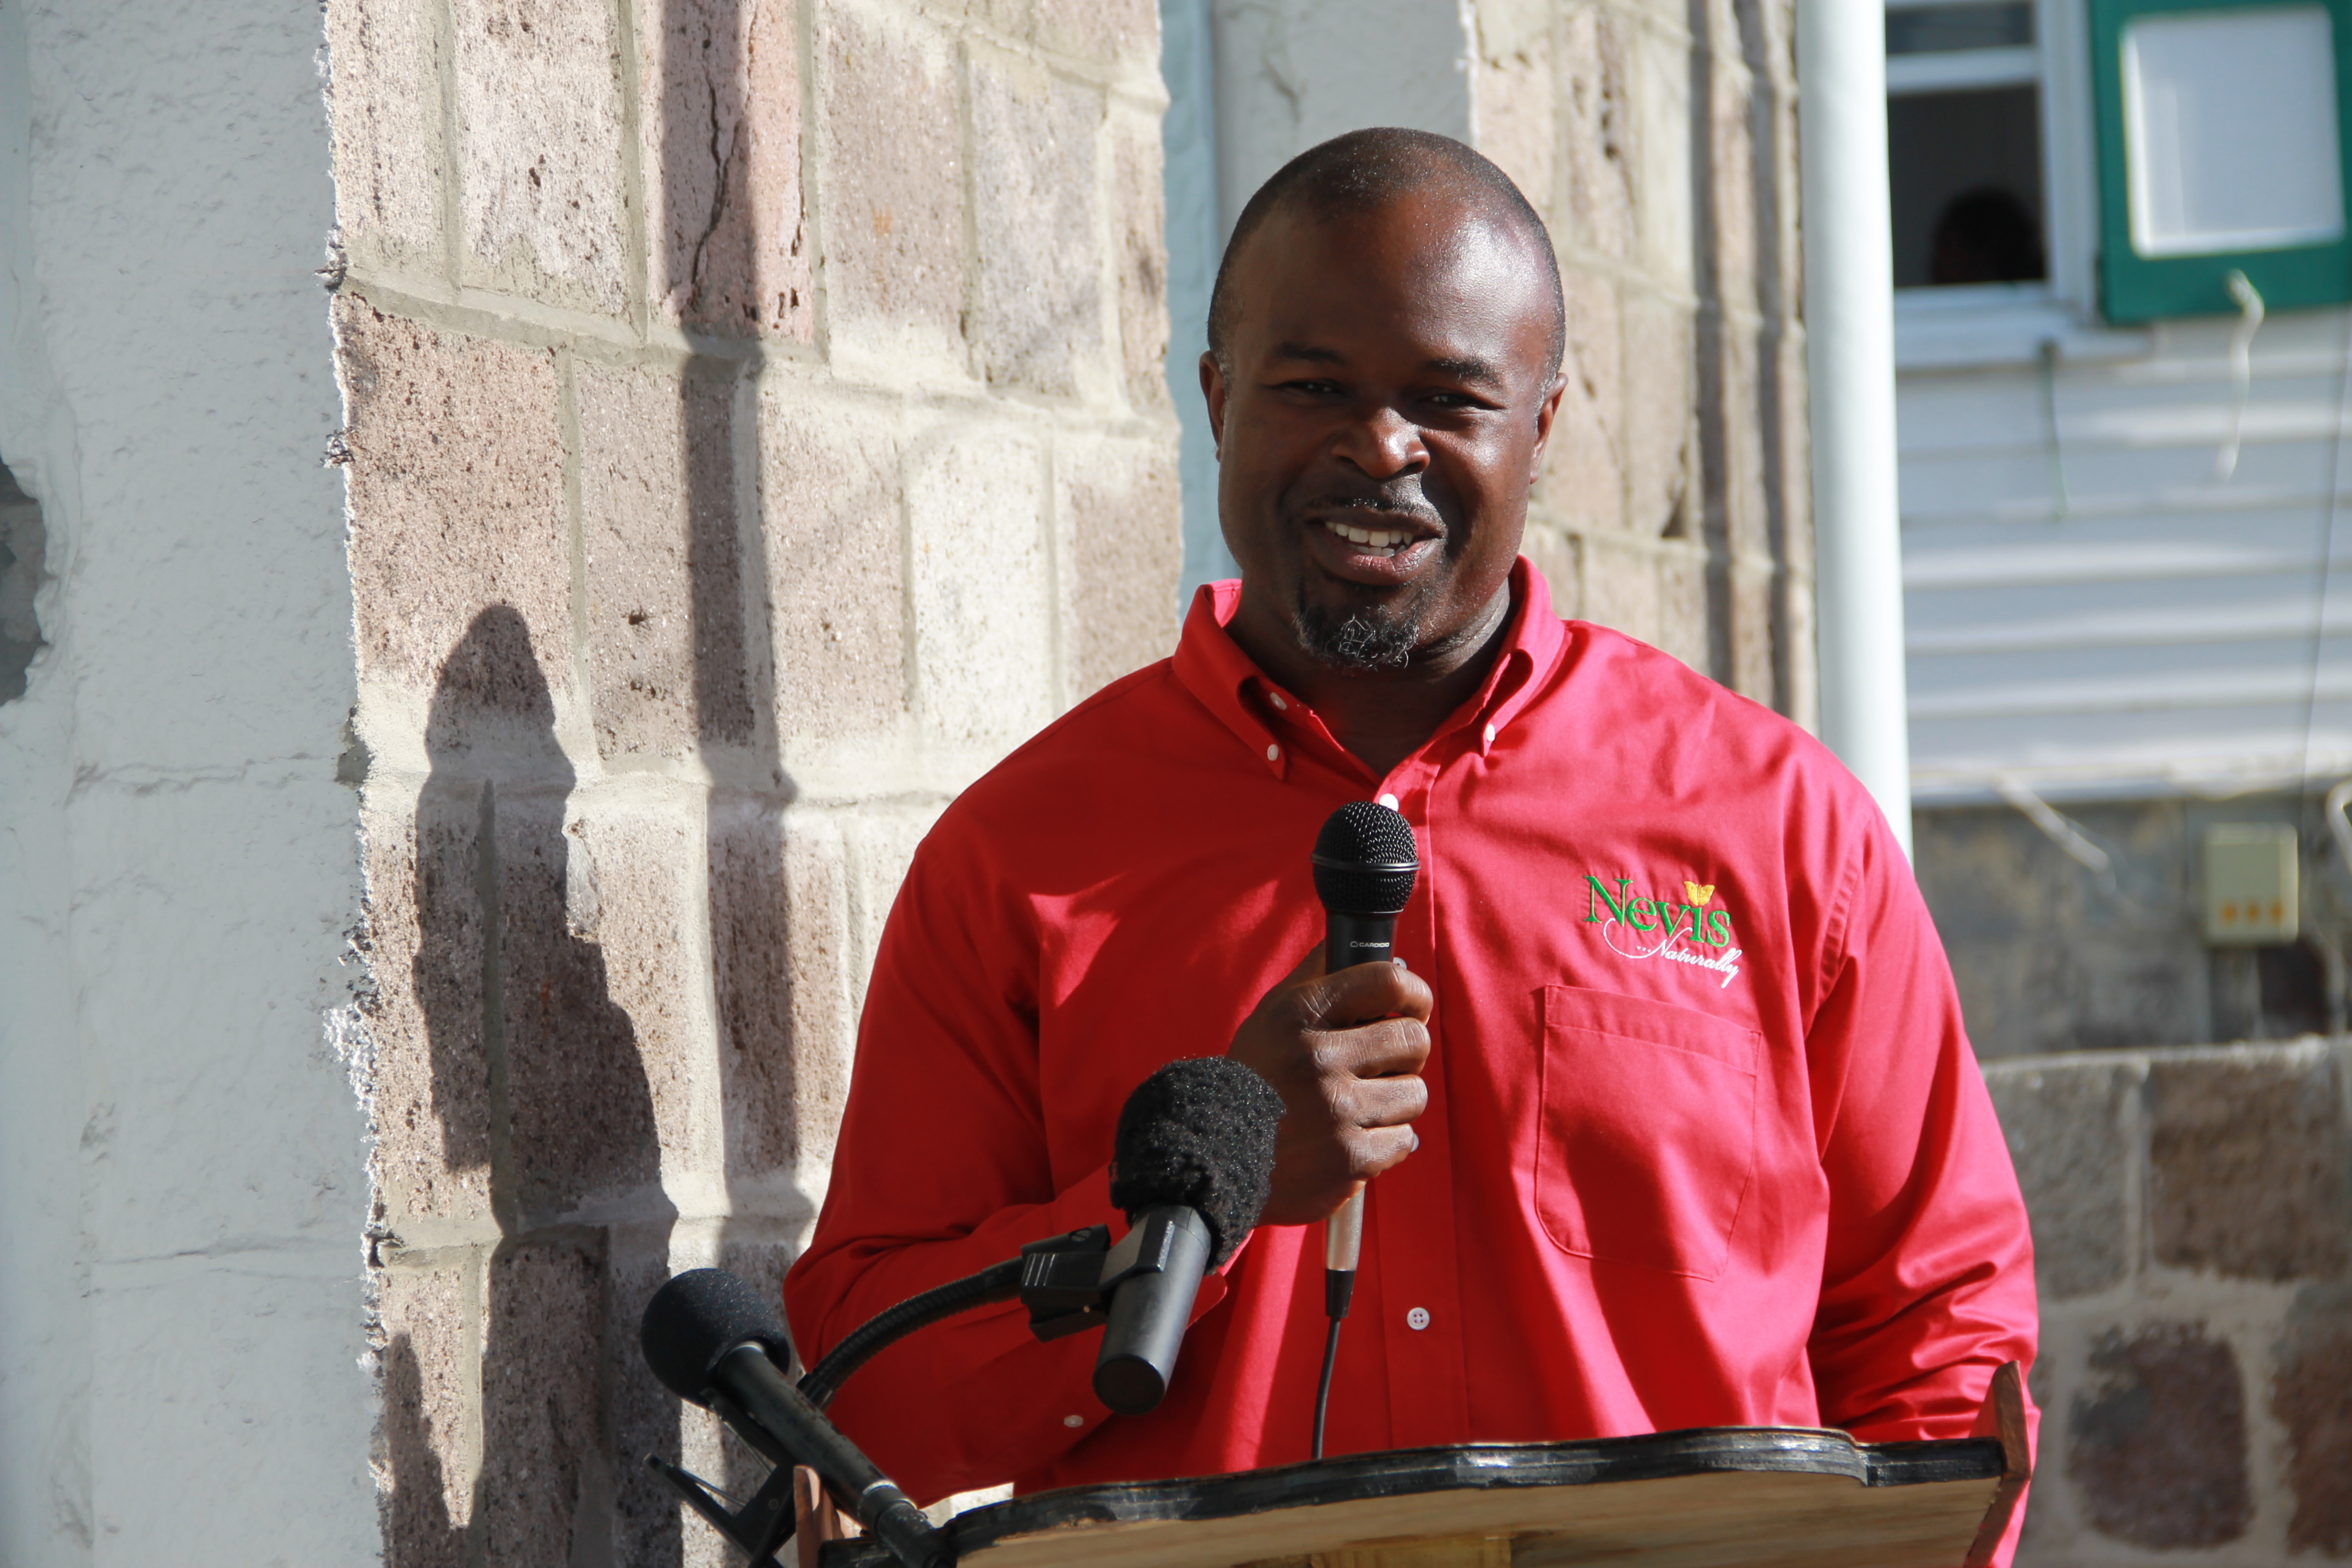 Chief Executive Officer of Nevis Tourism Authority Mr. Greg Phillip delivering remarks at the opening ceremony of the Nevis Tourism Authority Visitor Centre.